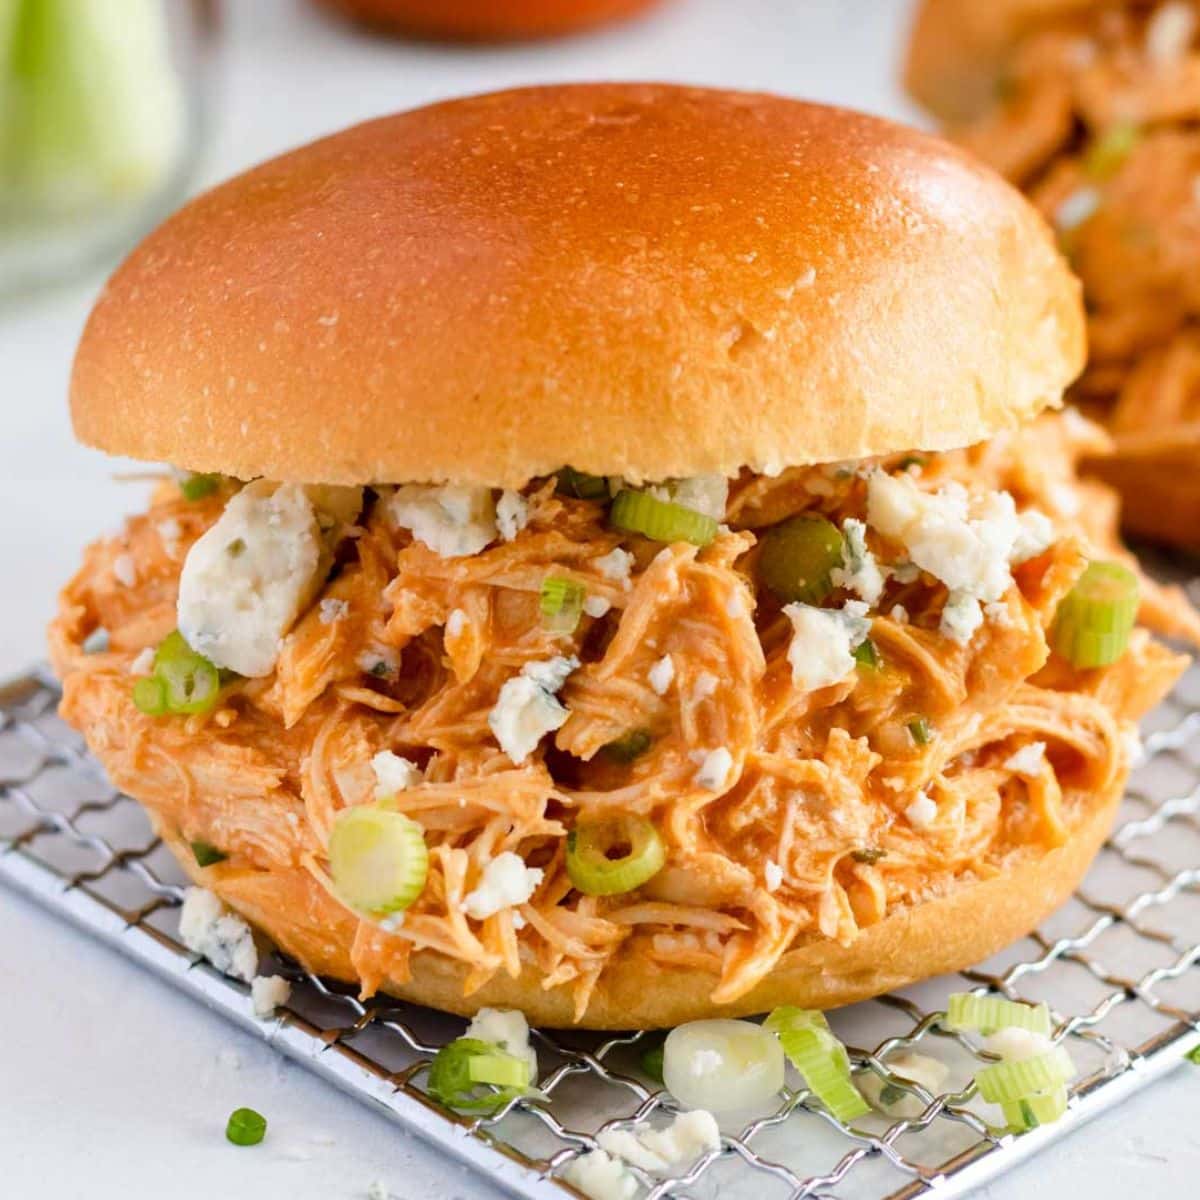 shredded buffalo chicken sandwich with extra blue cheese crumbles